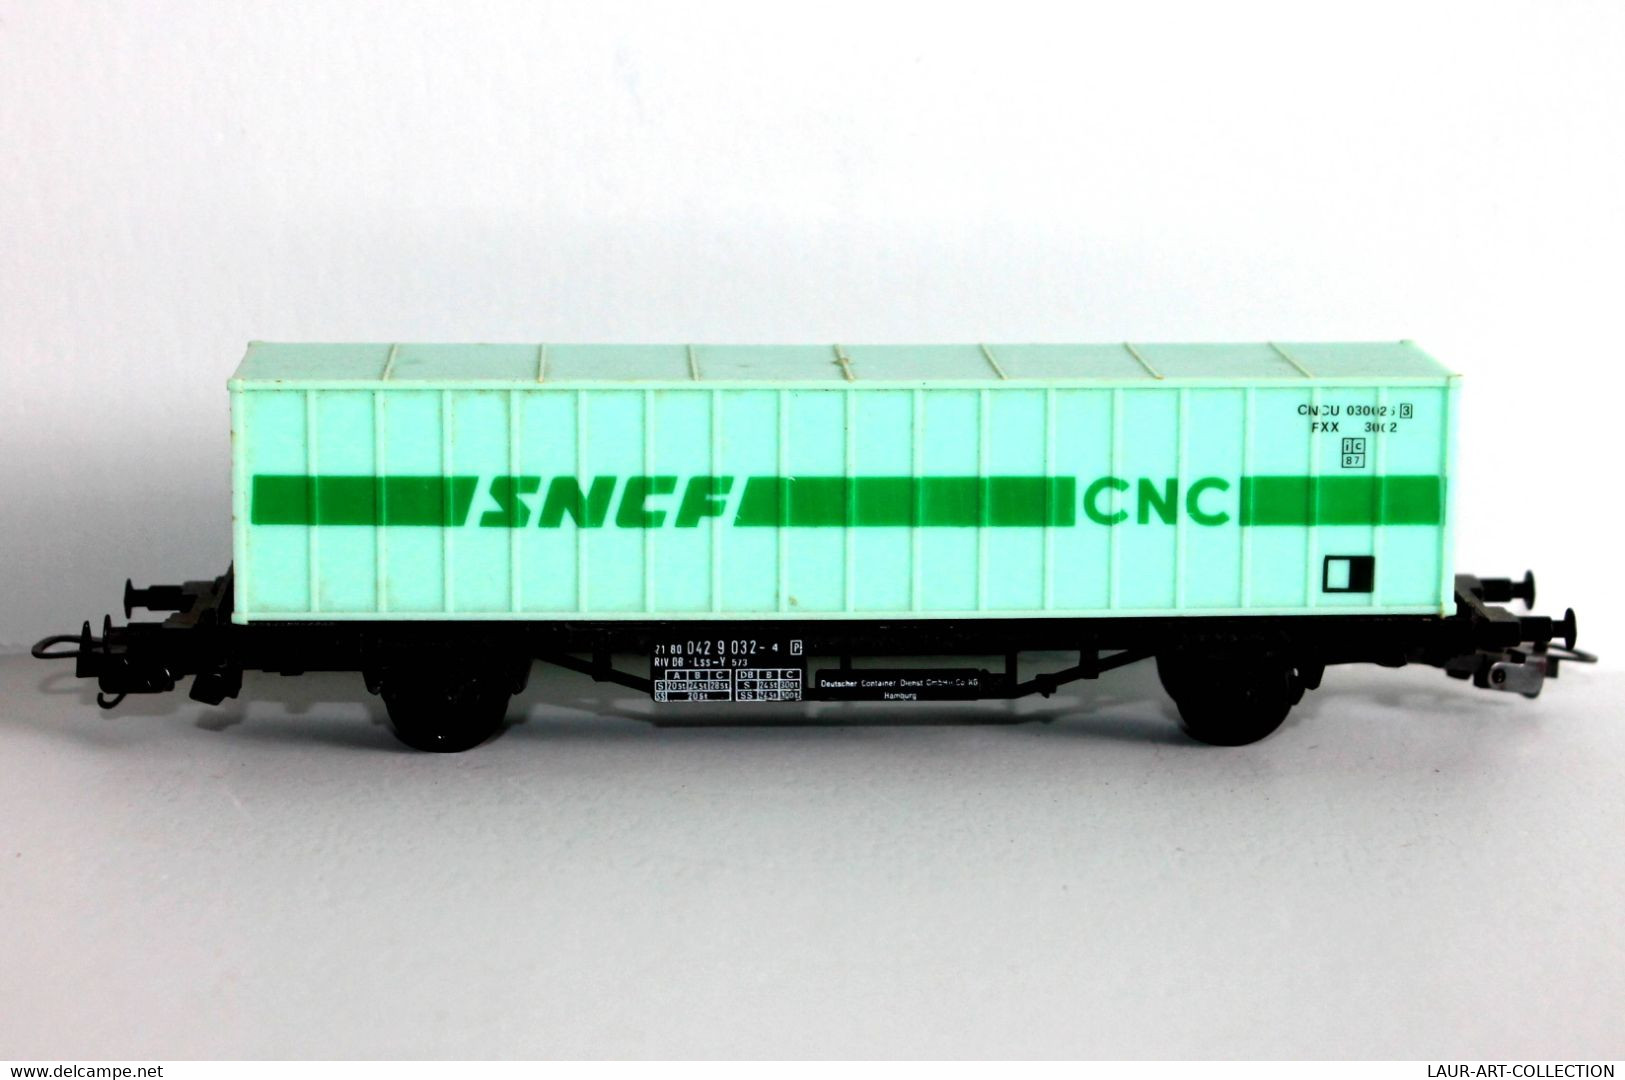 LIMA - WAGON MARCHANDISE - HO - SNCF CNC CNCU 0300263 / ITALY, FERROVIAIRE / TRAIN CHEMIN DE FER     (2304.74) - Goods Waggons (wagons)